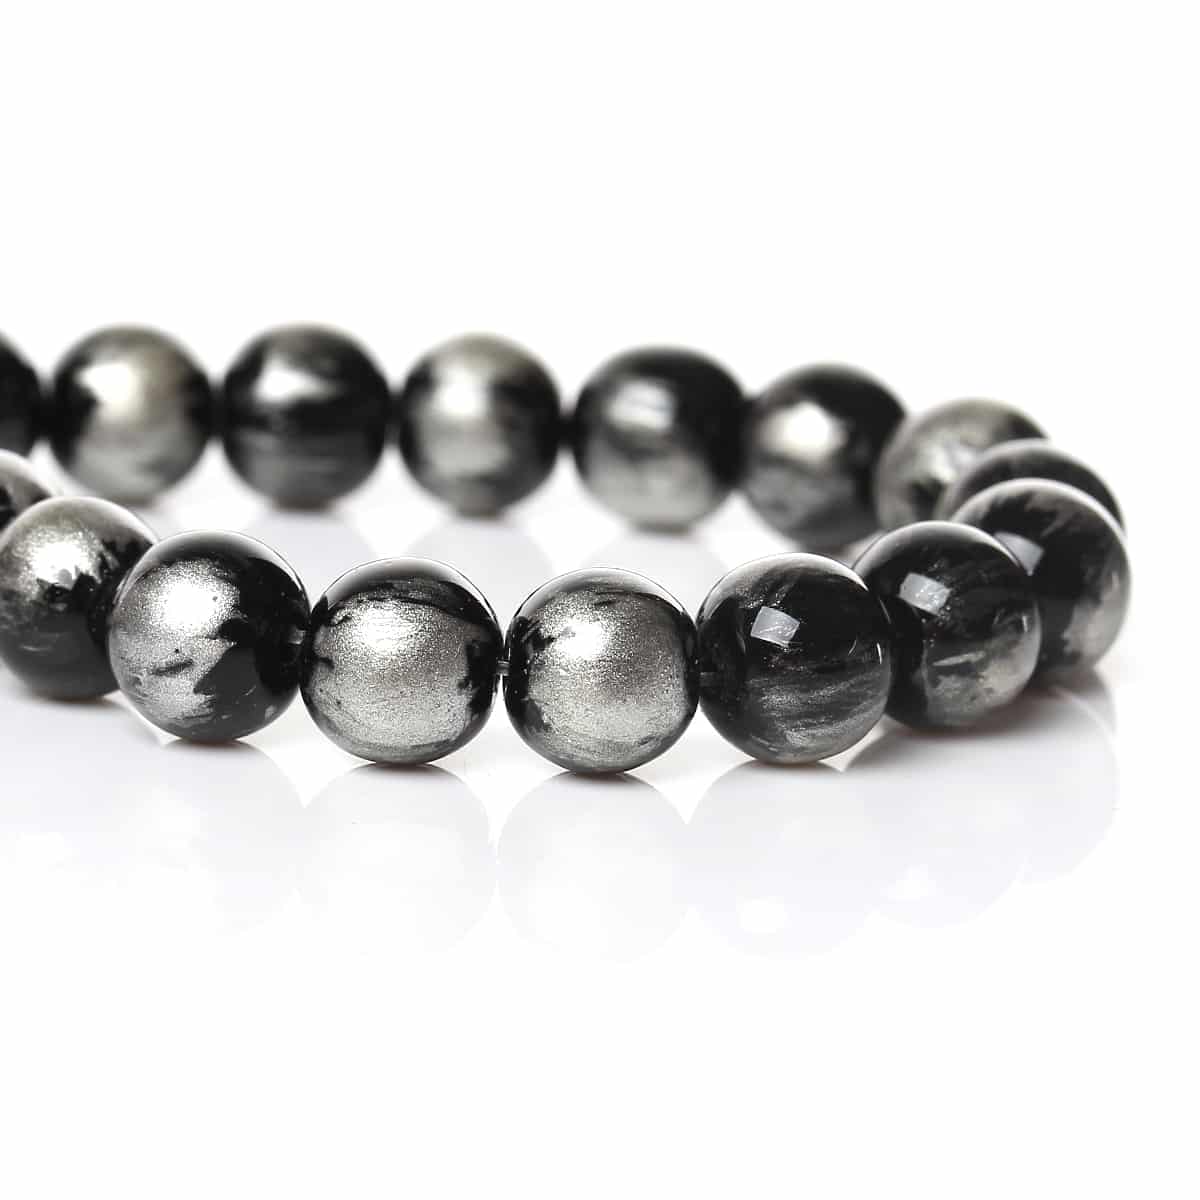 BD027 - 100 gr (6,600 beads) - 10/0 Glass Seed Beads - 2mm Diameter - Hole  Size: 0.5mm - Black - Favored Memories